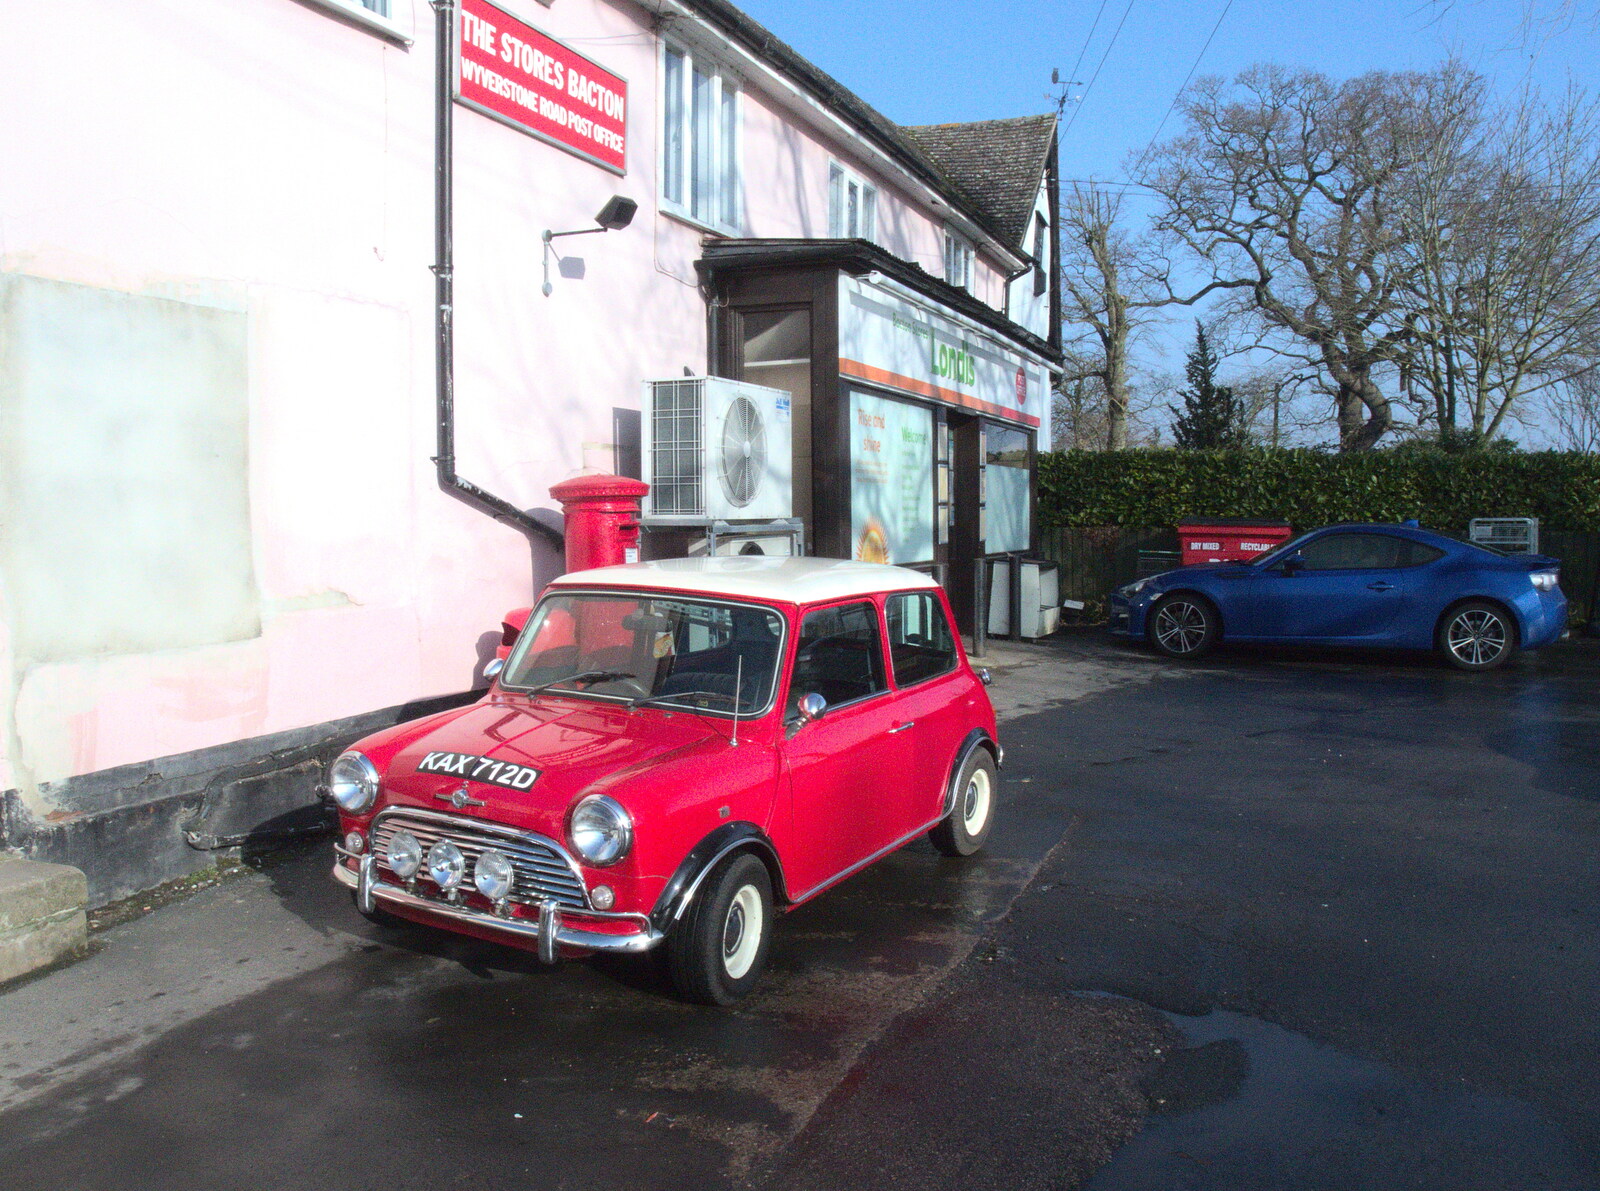 A lovely old Mini at Londis in Bacton, Suffolk from Little Venice and Diss Park, West London and Norfolk - 17th February 2017